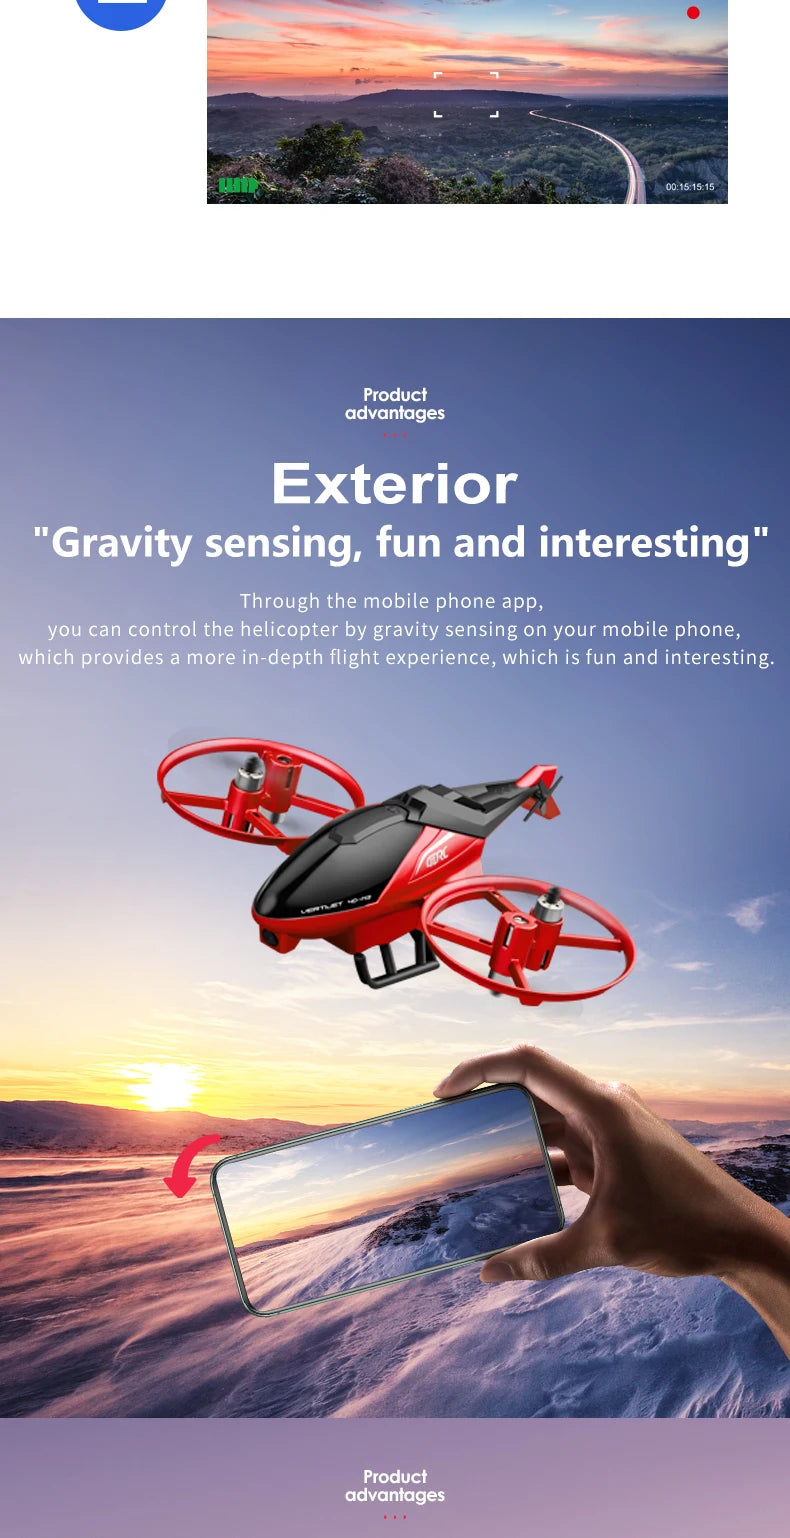 4DRC M3 RC Helicopter, through the mobile phone app, you can control the helicopter by gravity sensing on your mobile phone